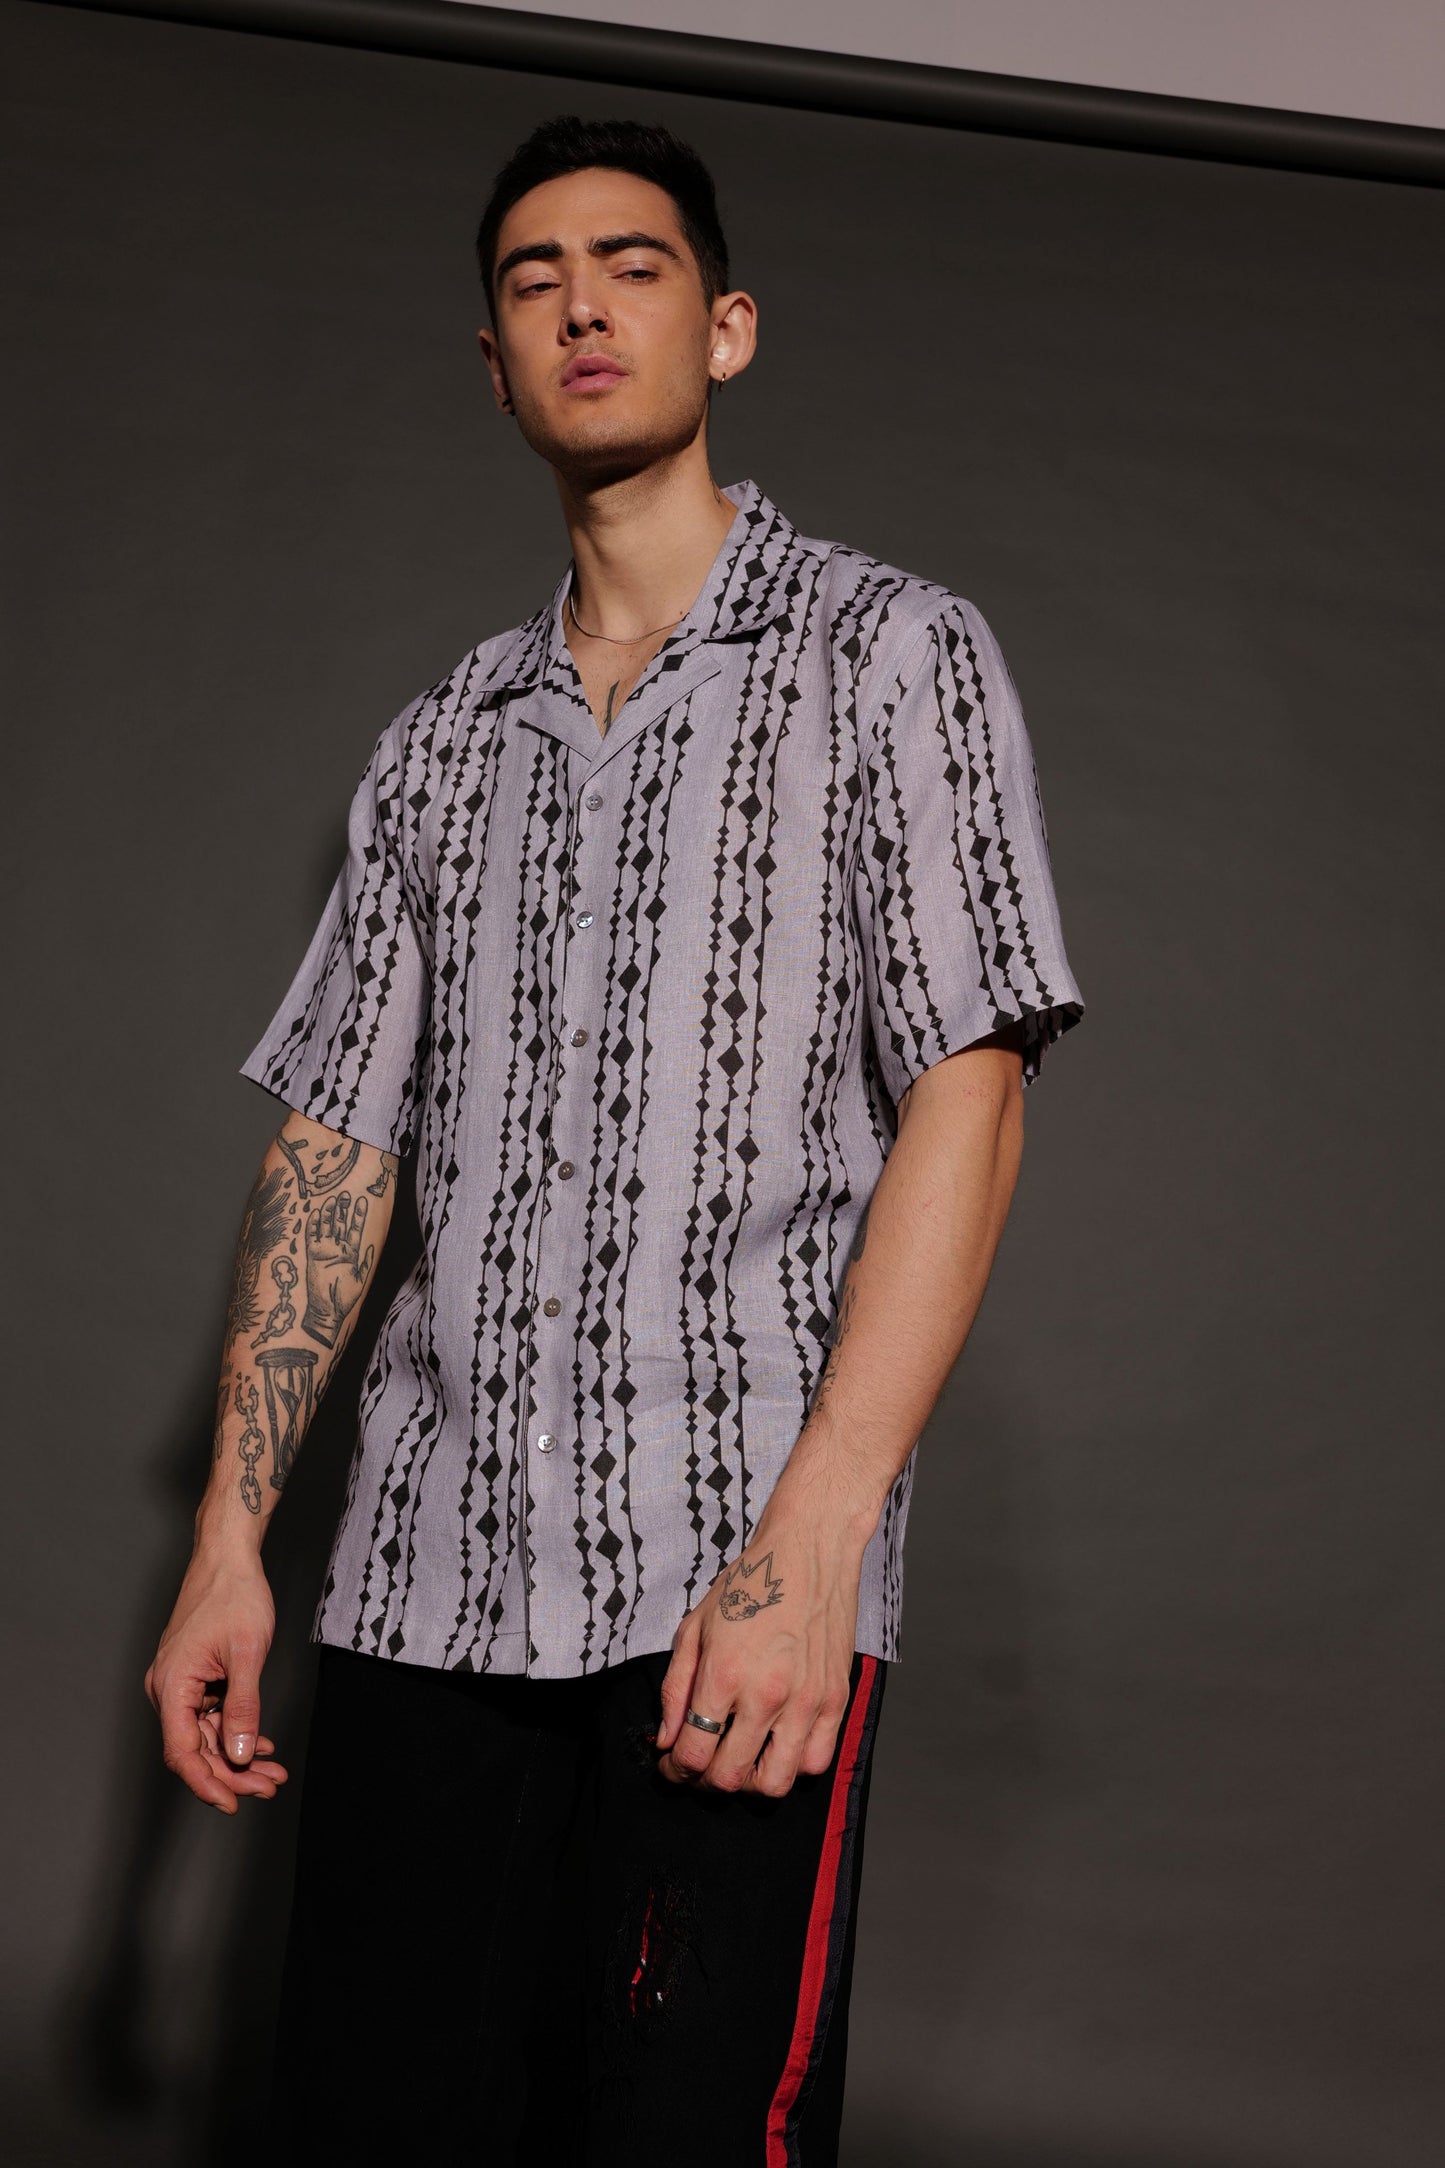 Designer Menswear shirt with cool graphics and high quality 